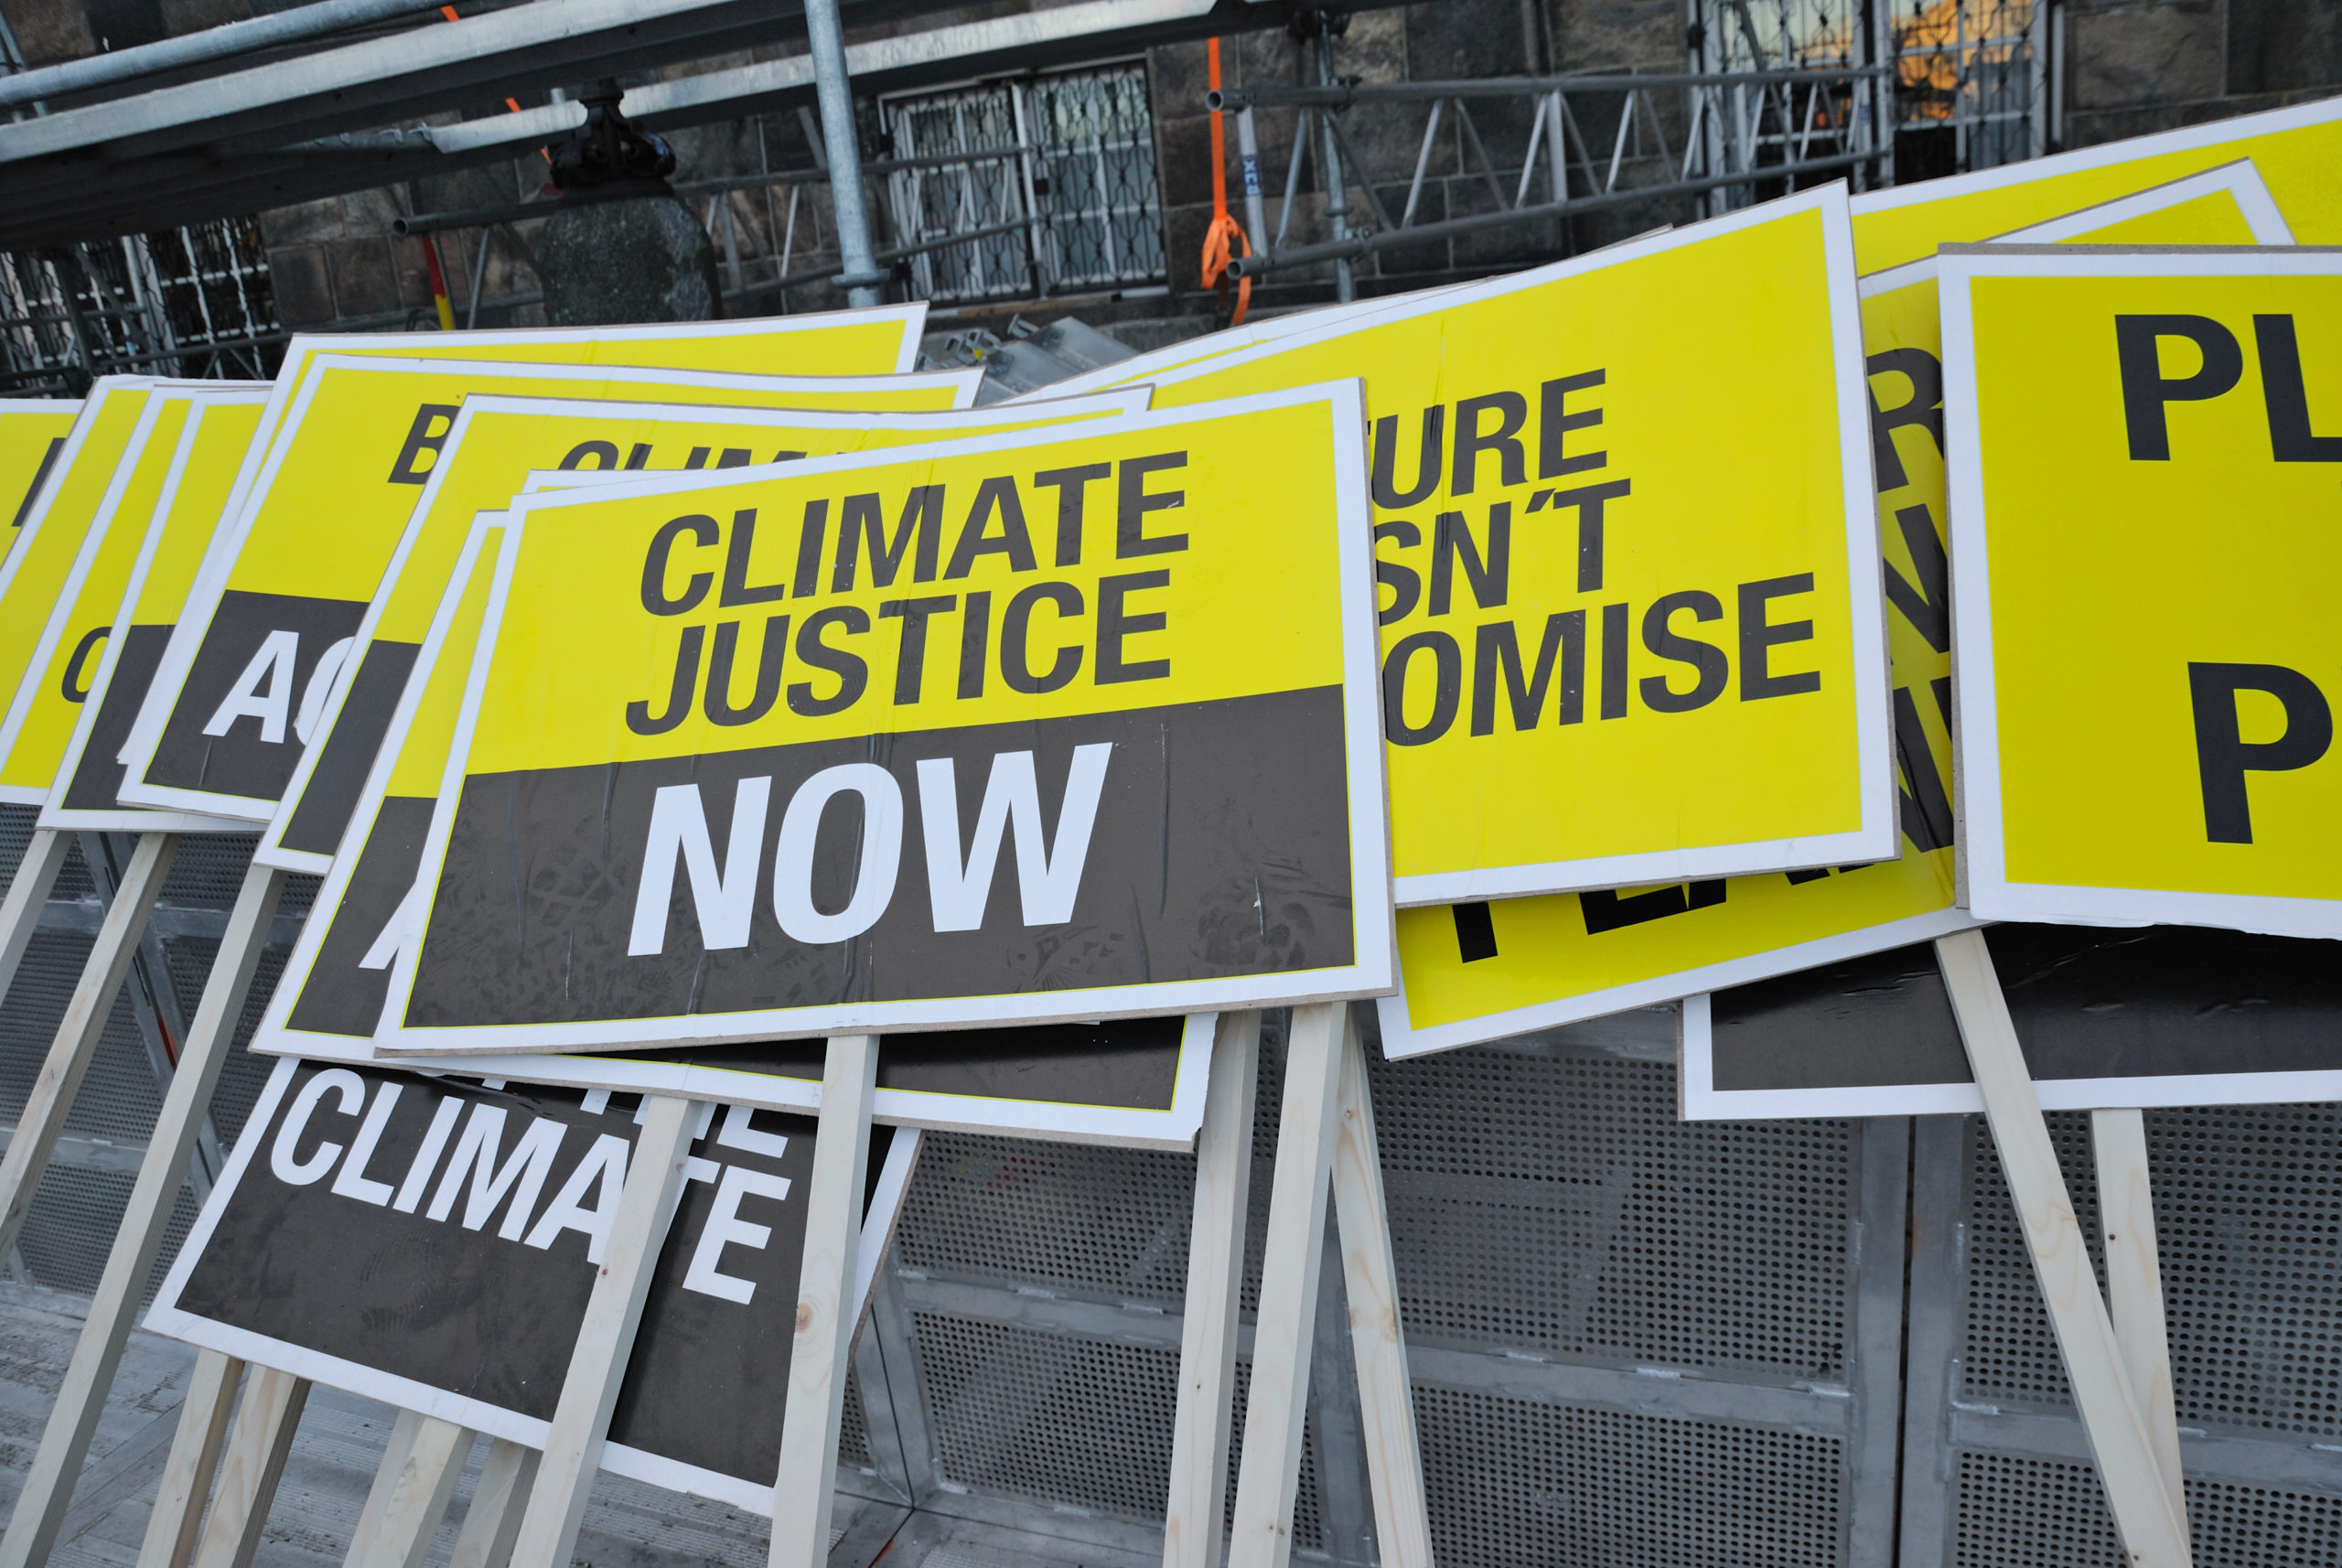 Color photo of pile of yellow and black protest signs reading "Climate Justice NOW."